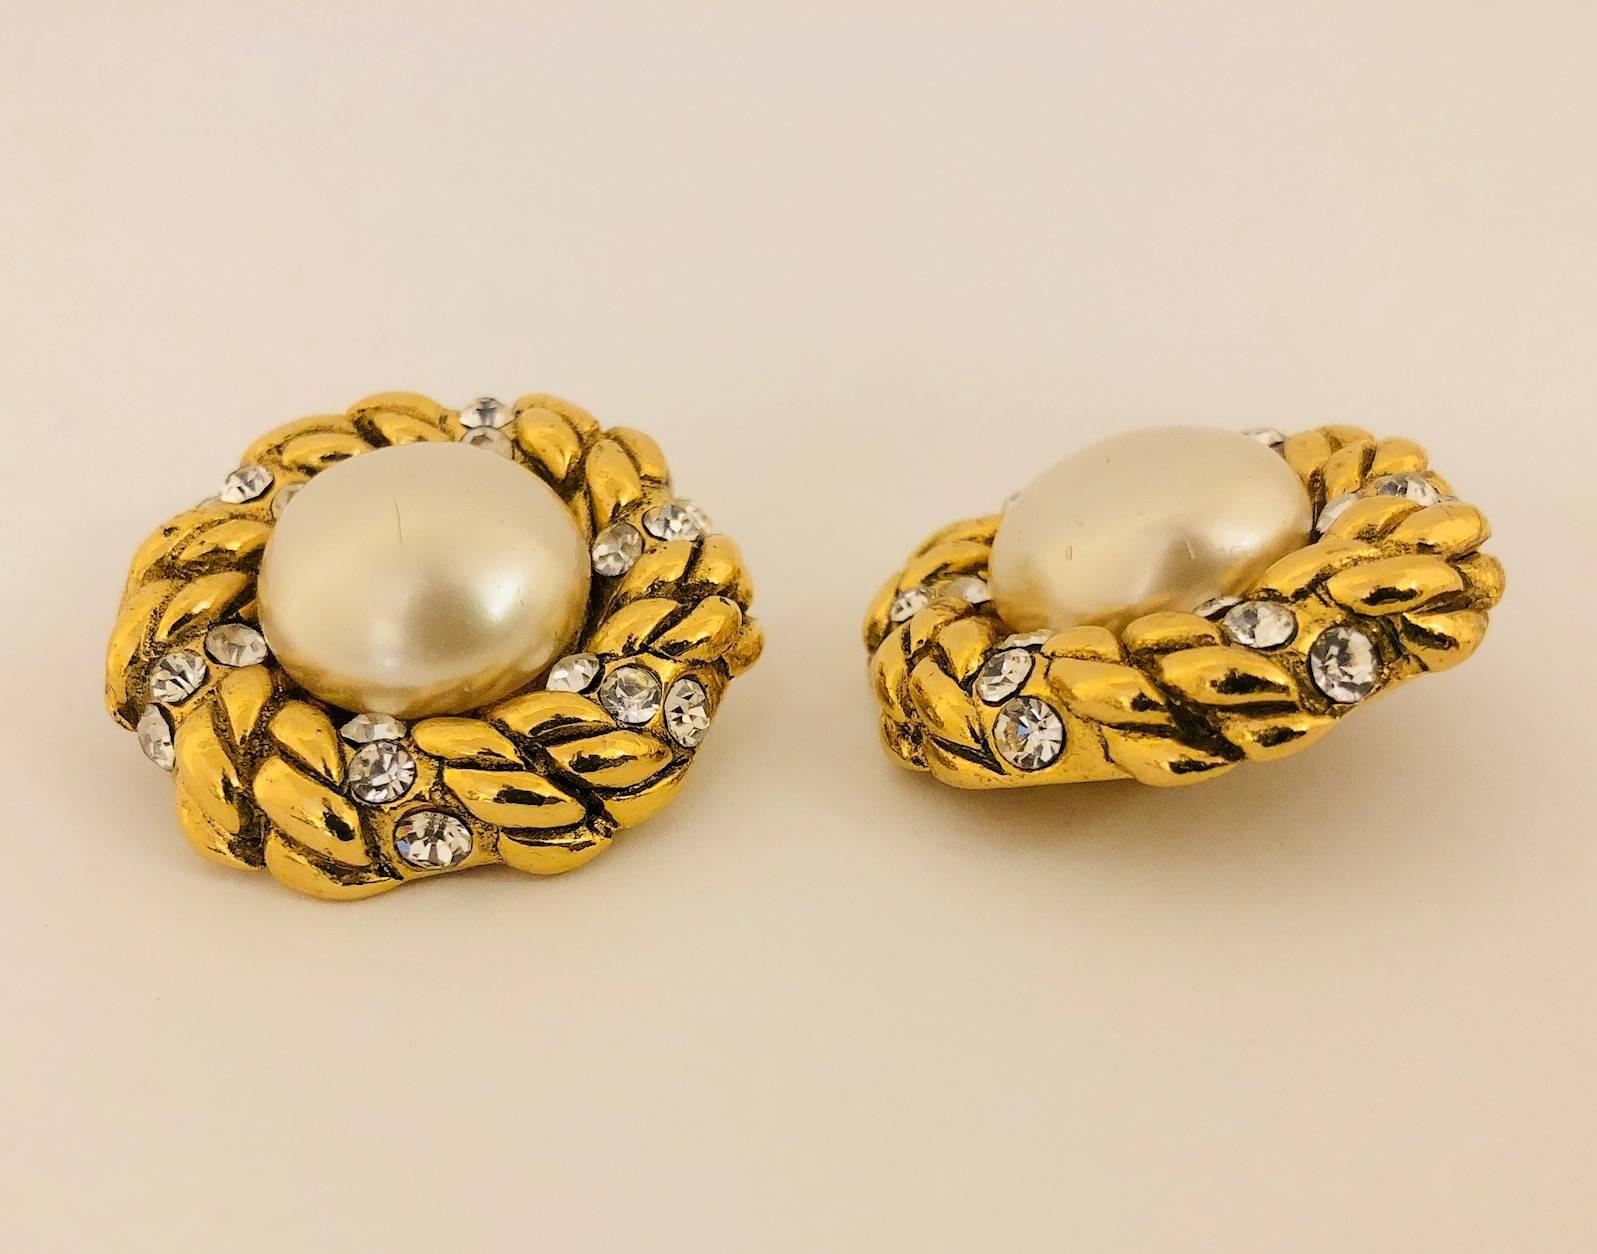 Gold tone Chanel vintage earrings featuring faux pearls and crystal details with clip-on closures looks as new as first day purchased.  The gold tone rope design features in a pattern 3 crystal grouping all around the frame of the faux pearl located